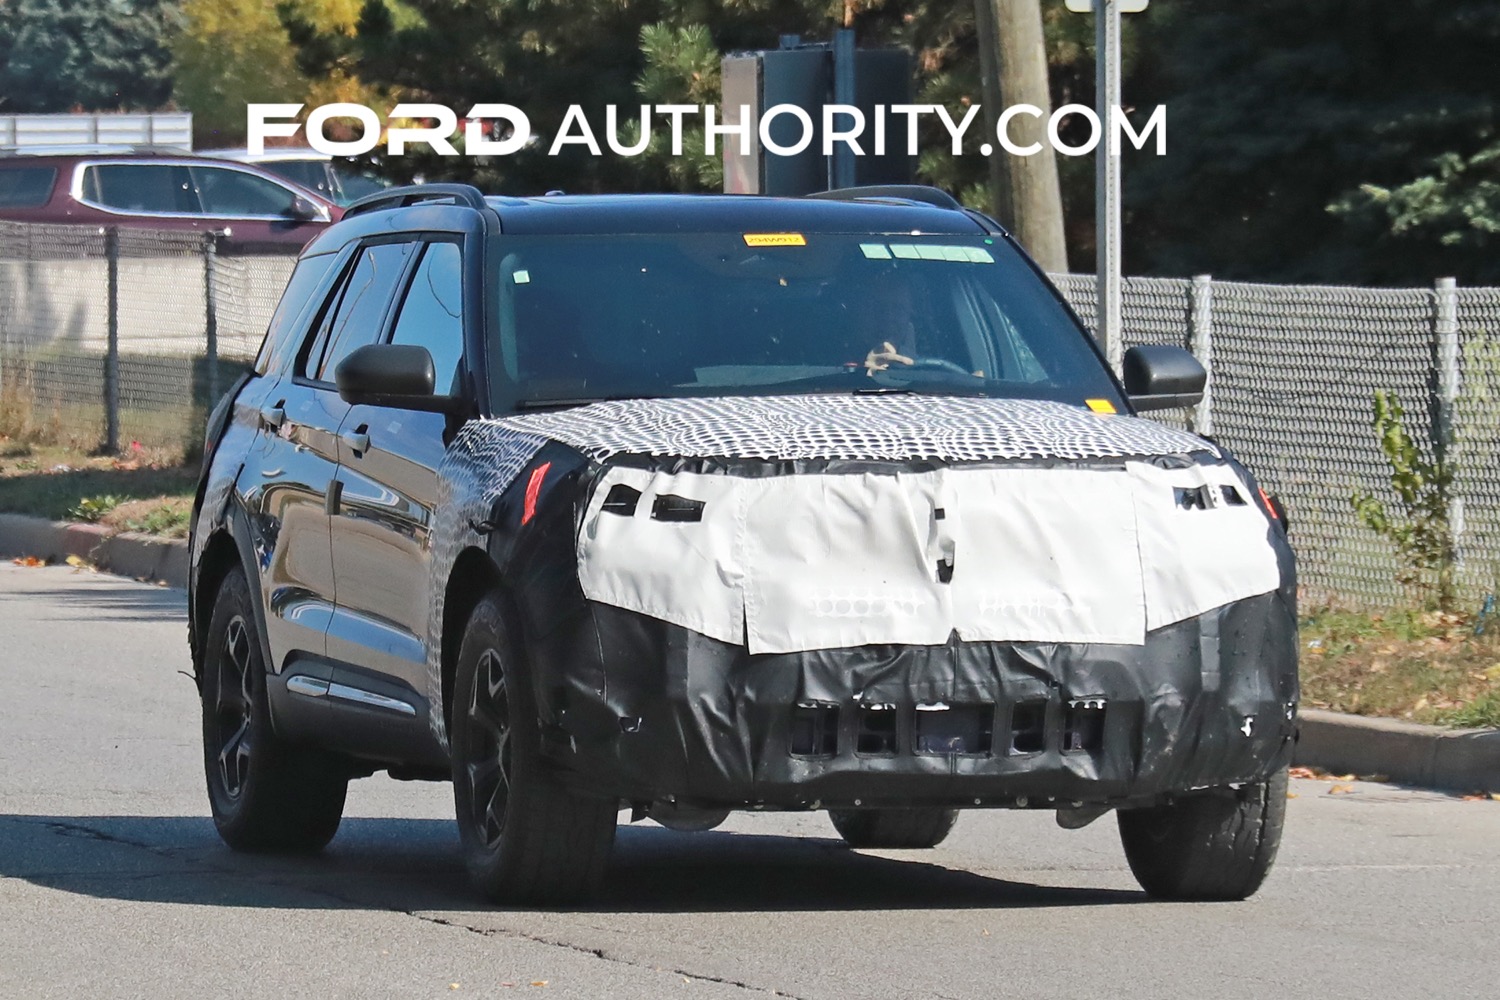 Ford Explorer Refresh Pushed Back To 2025 Model Year: Exclusive